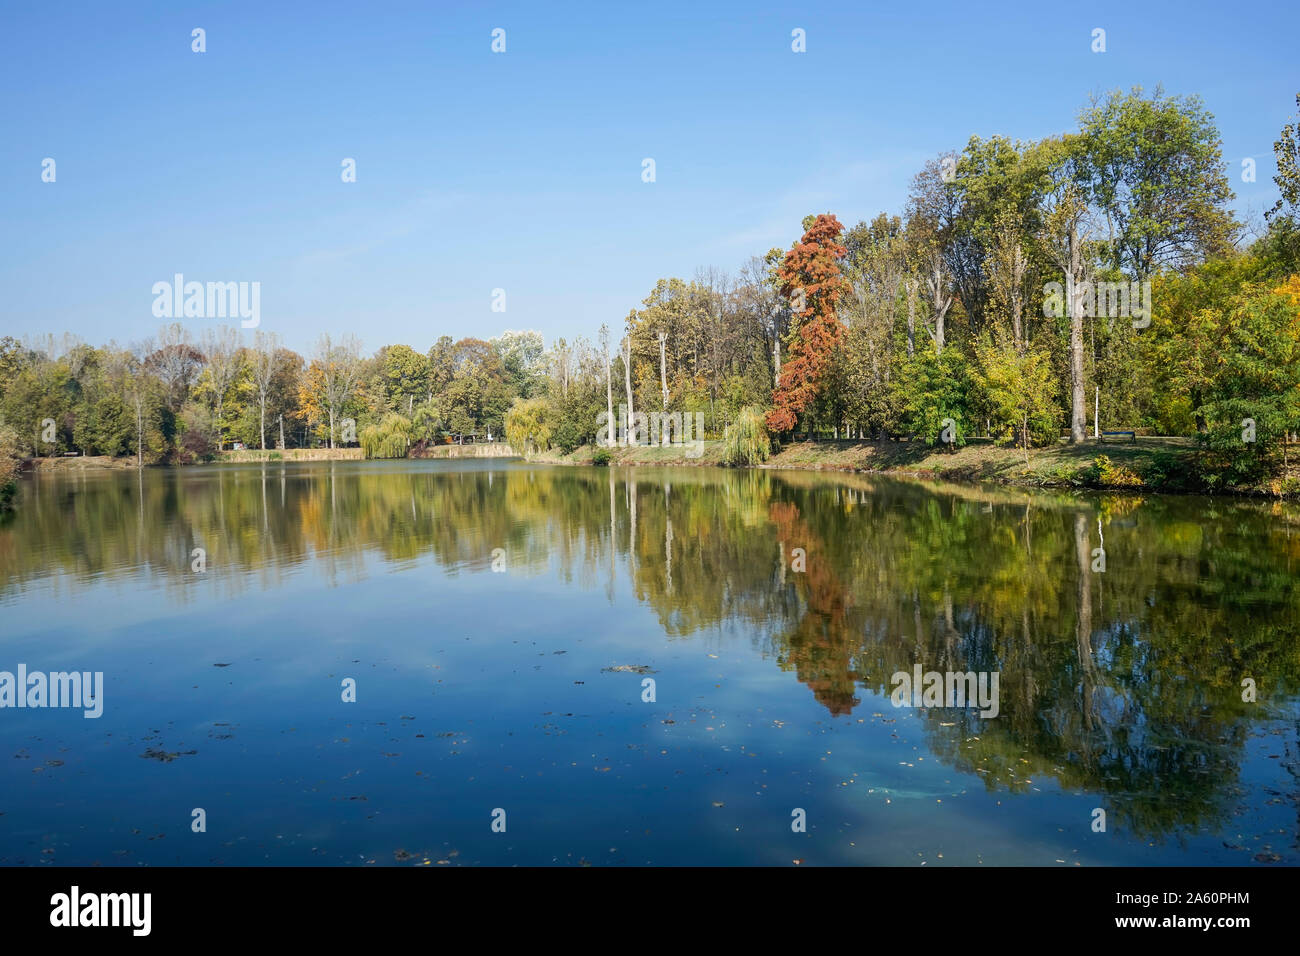 Serene and calm lake with fall foliage colors of the trees in the background , autumn landscape near Ploiesti City, Romania Stock Photo